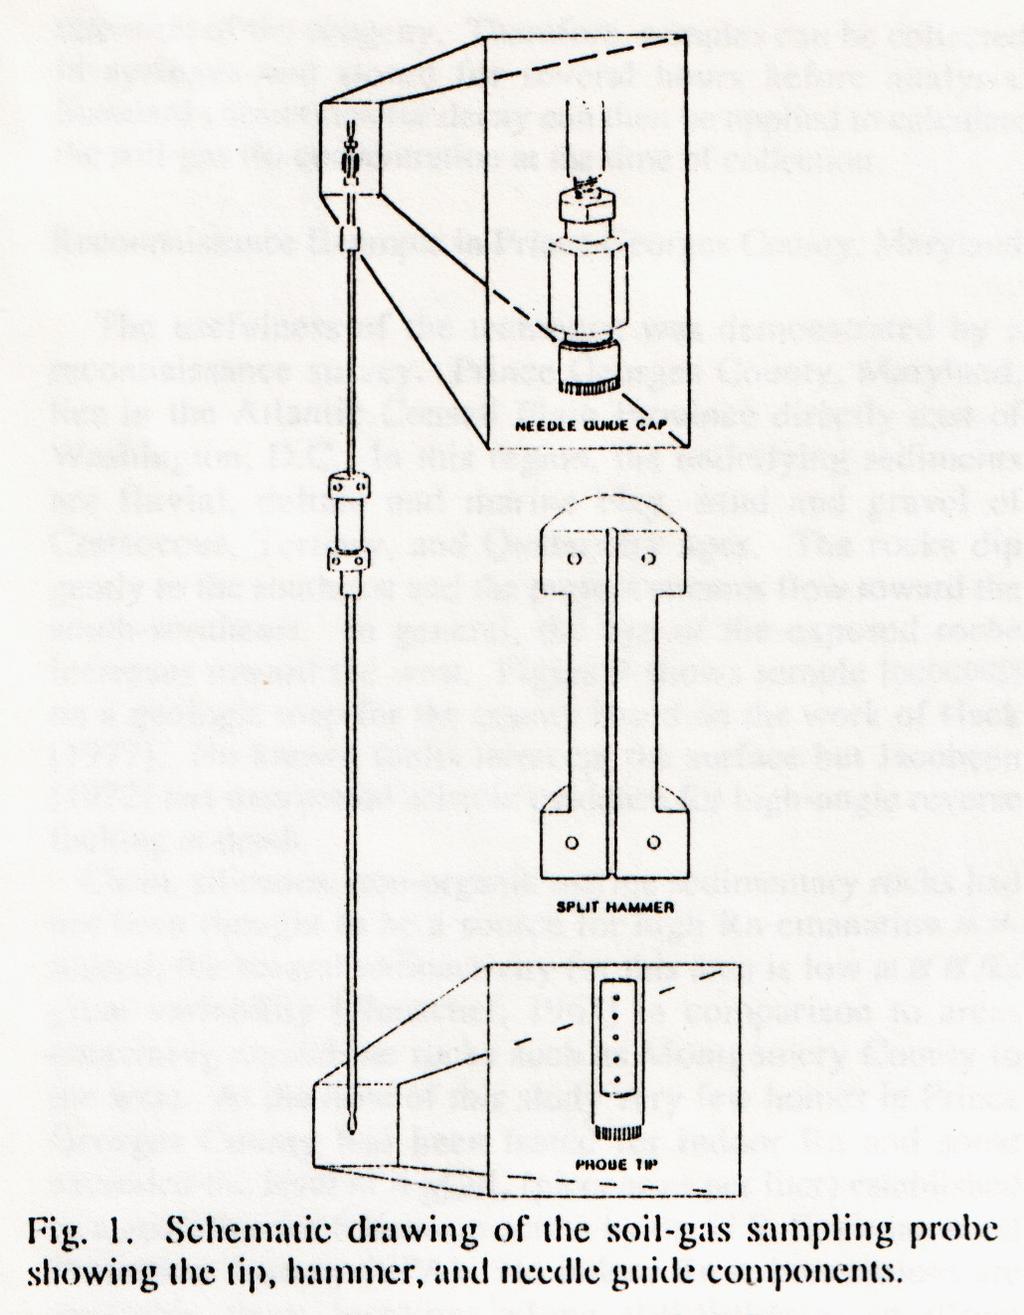 or a small-diameter probe used by REIMER (1990) REIMER, G. M.